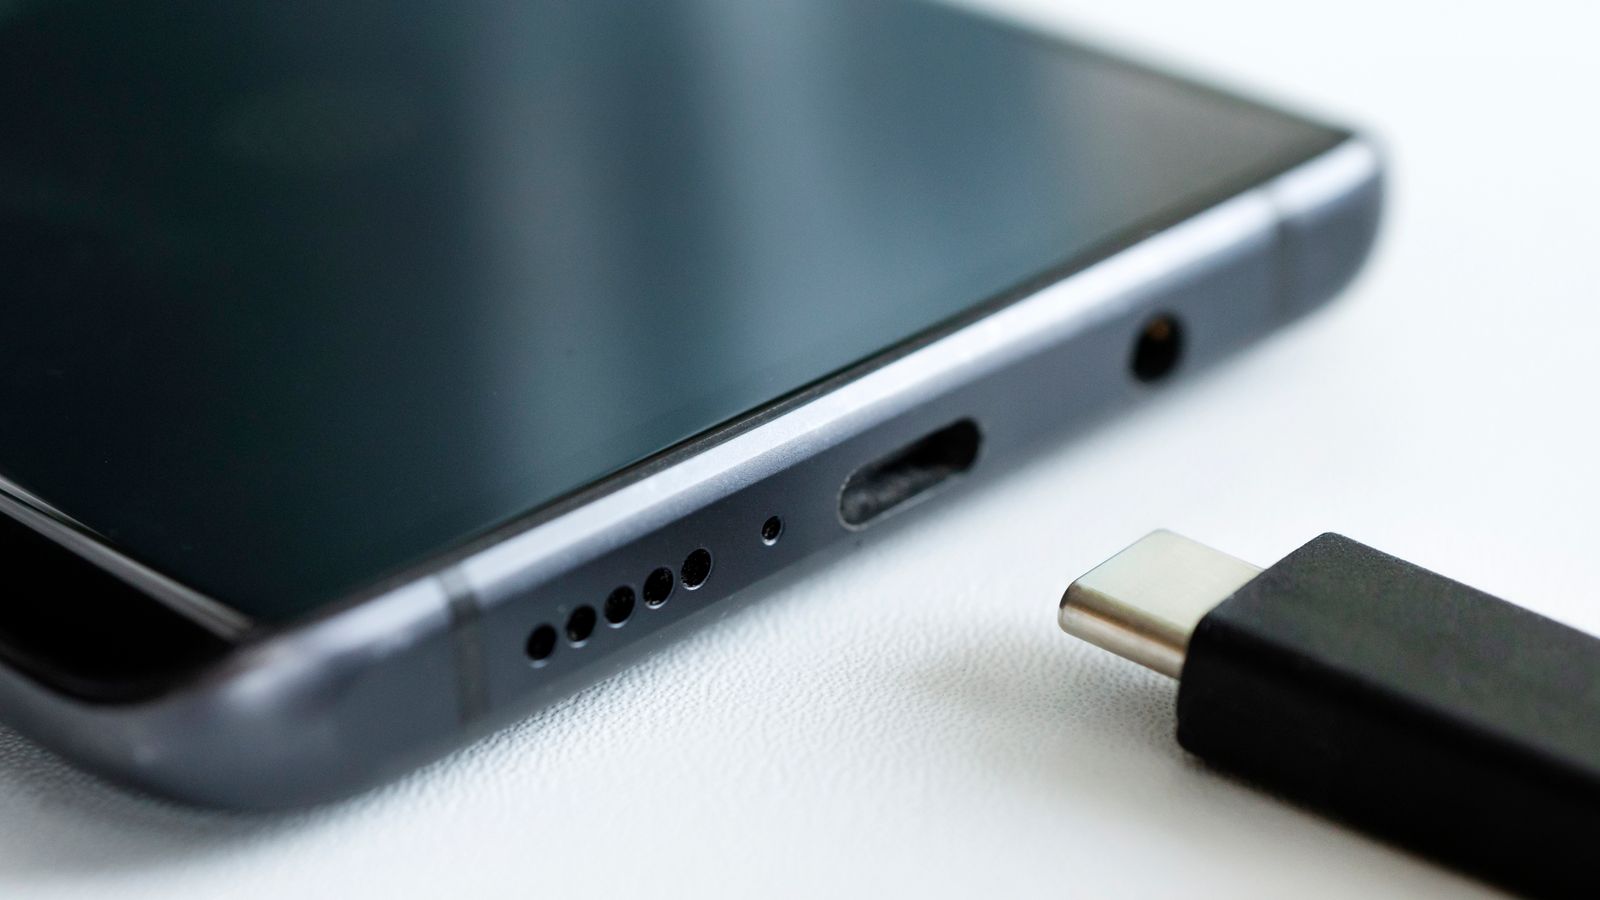 Phone chargers to be standardised across Europe from 2024 – forcing Apple to change to USB-C